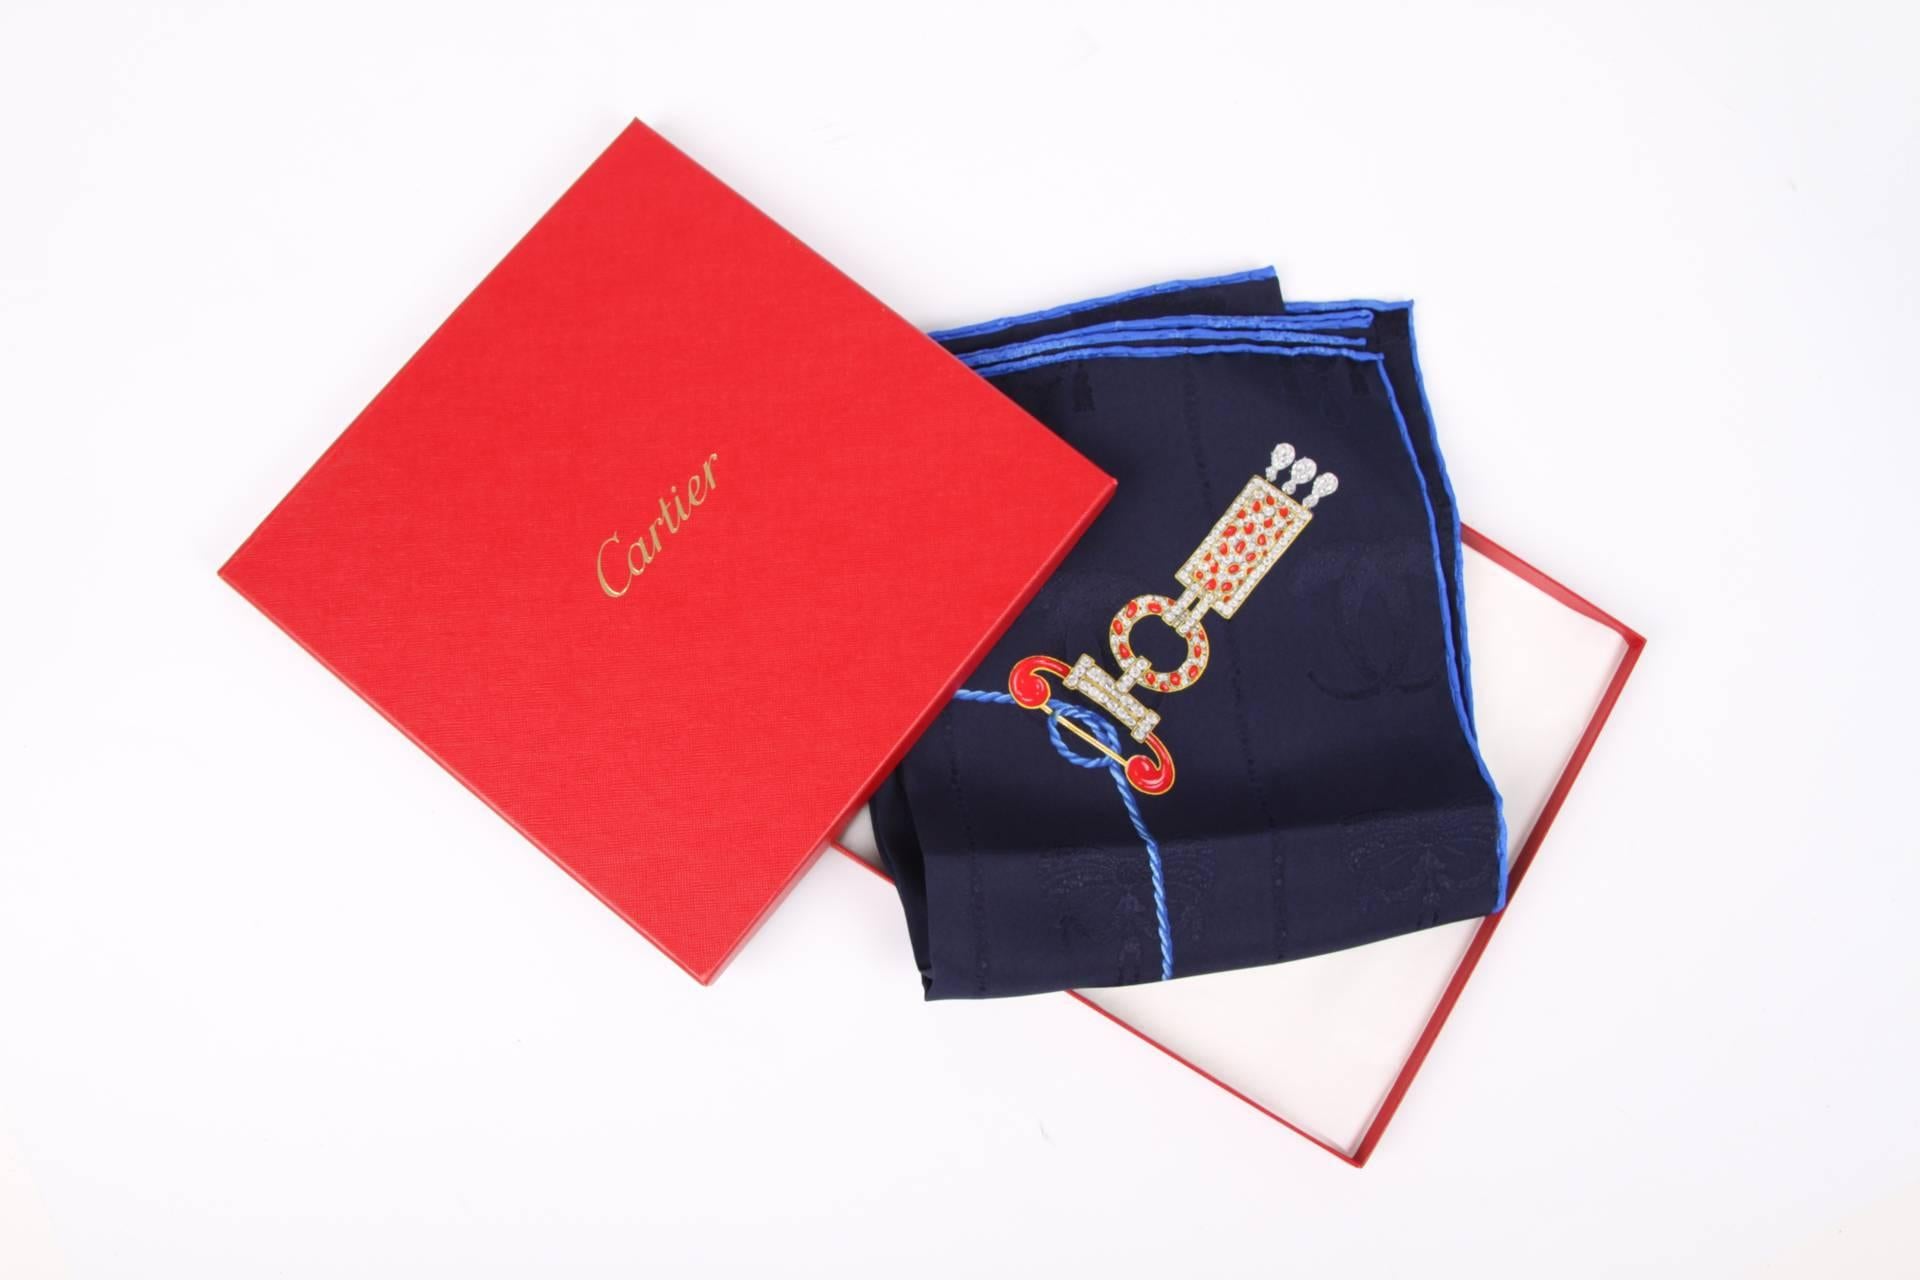 Diaphanous scarf by Cartier crafted in dark blue silk. Pretty!

The scarf is decorated with different pieces of jewelry in red, white, green and gold. On top of that you will find a woven pattern in the fabric. Very nice!

In perfect condition, new